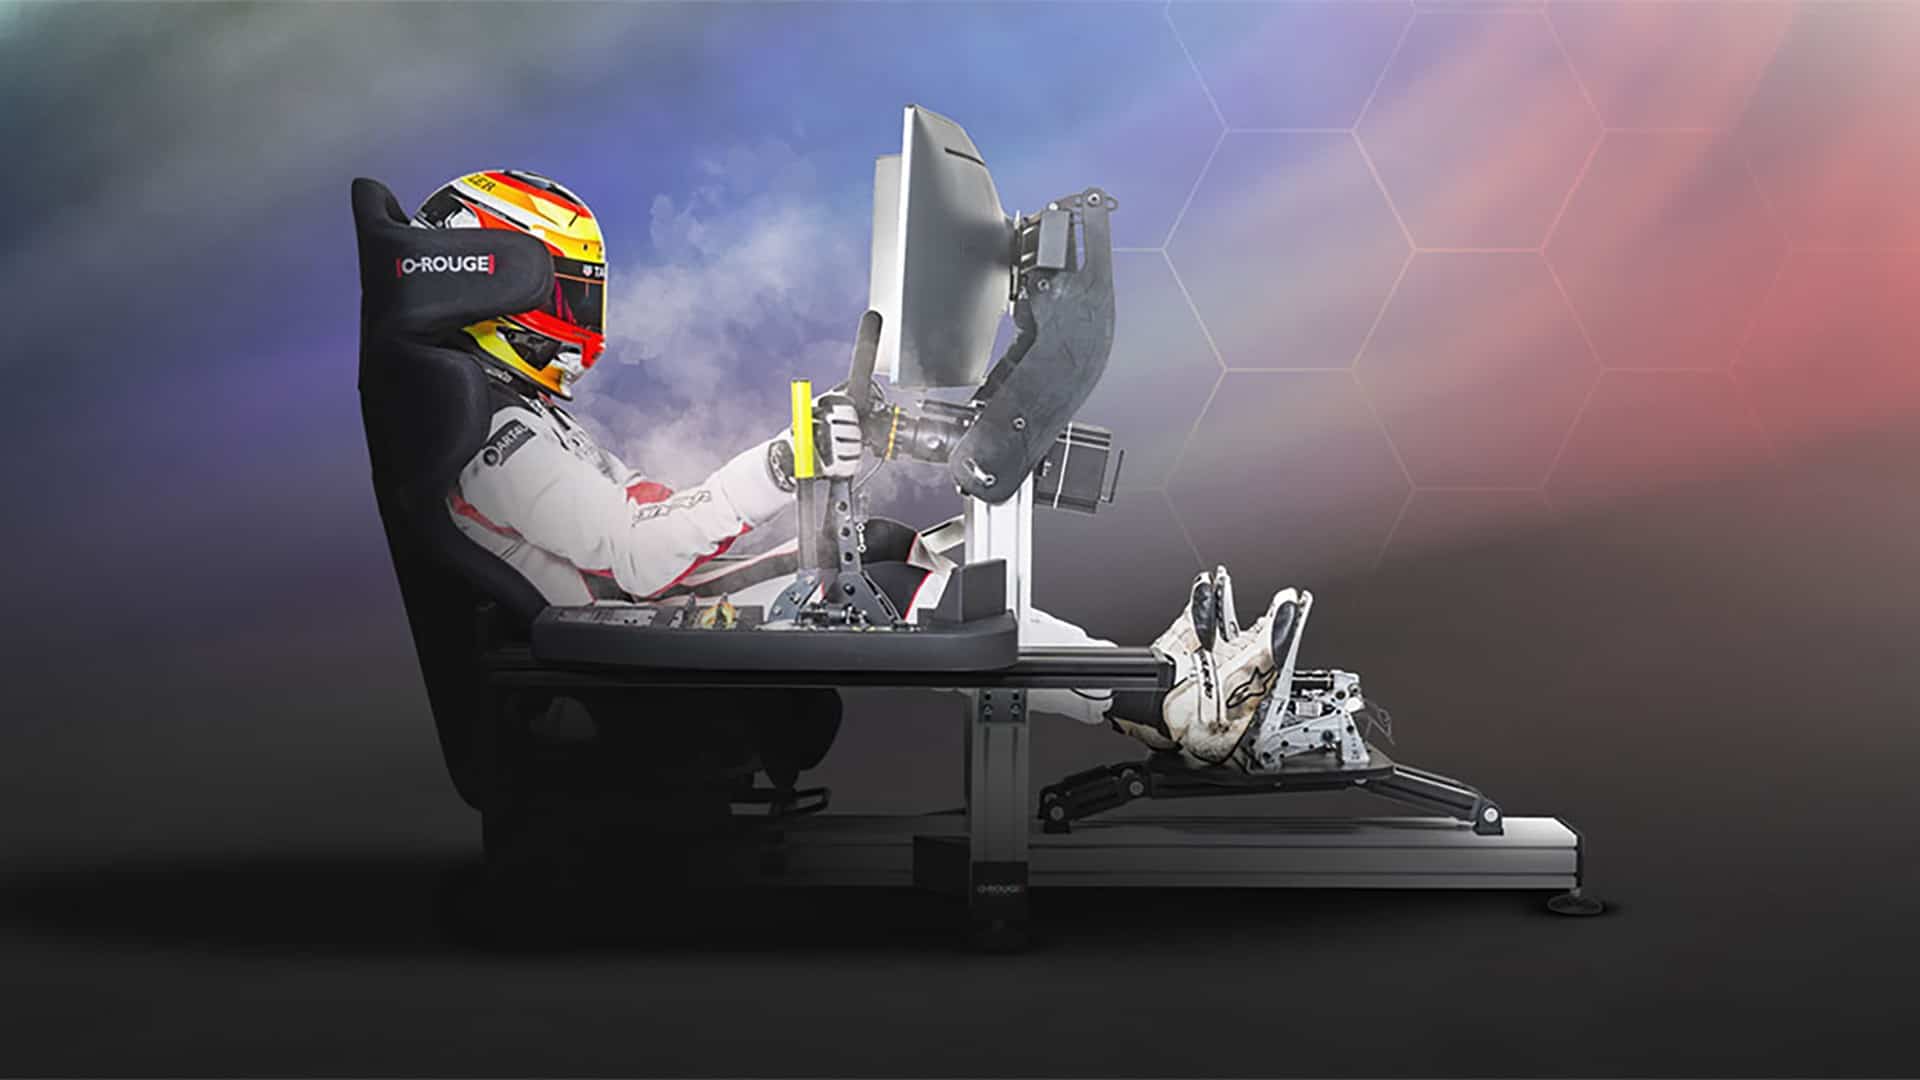 O-Rouge unveils Cold Fusion, an air-cooled sim racing seat